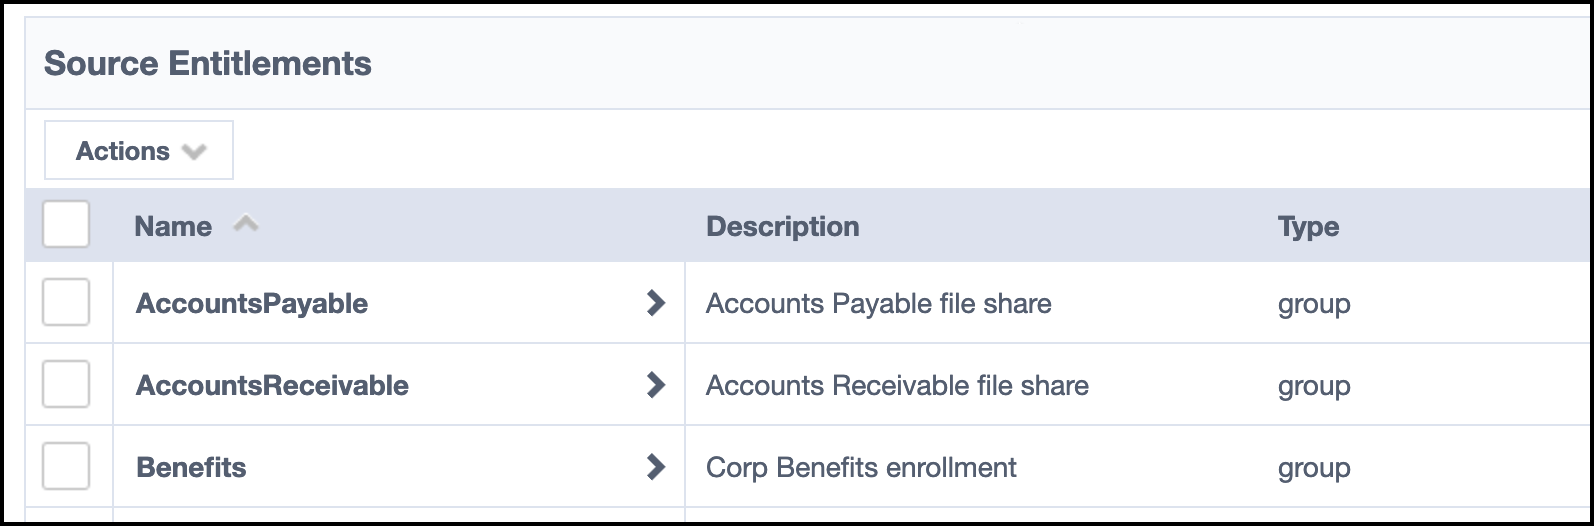 Source  entitlements with enhanced data like descriptions and the type.